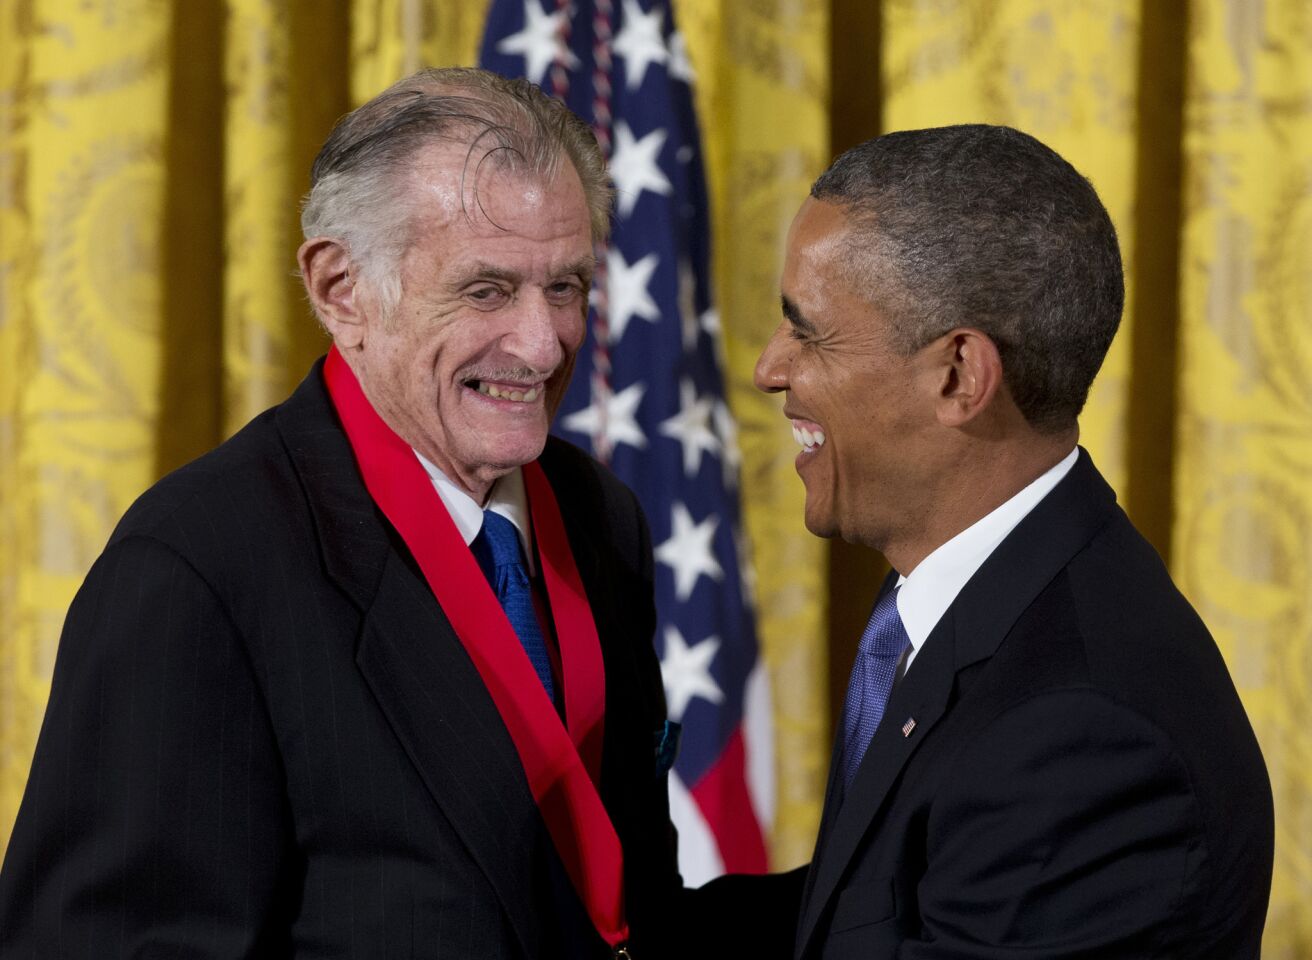 Deford was an award-winning sports journalist and commentator whose elegant reportage was a staple for years at Sports Illustrated and National Public Radio. He was the first sportswriter awarded the National Humanities Medal. In 2013, President Obama honored him for "transforming how we think about sports." He was 78. Full obituary